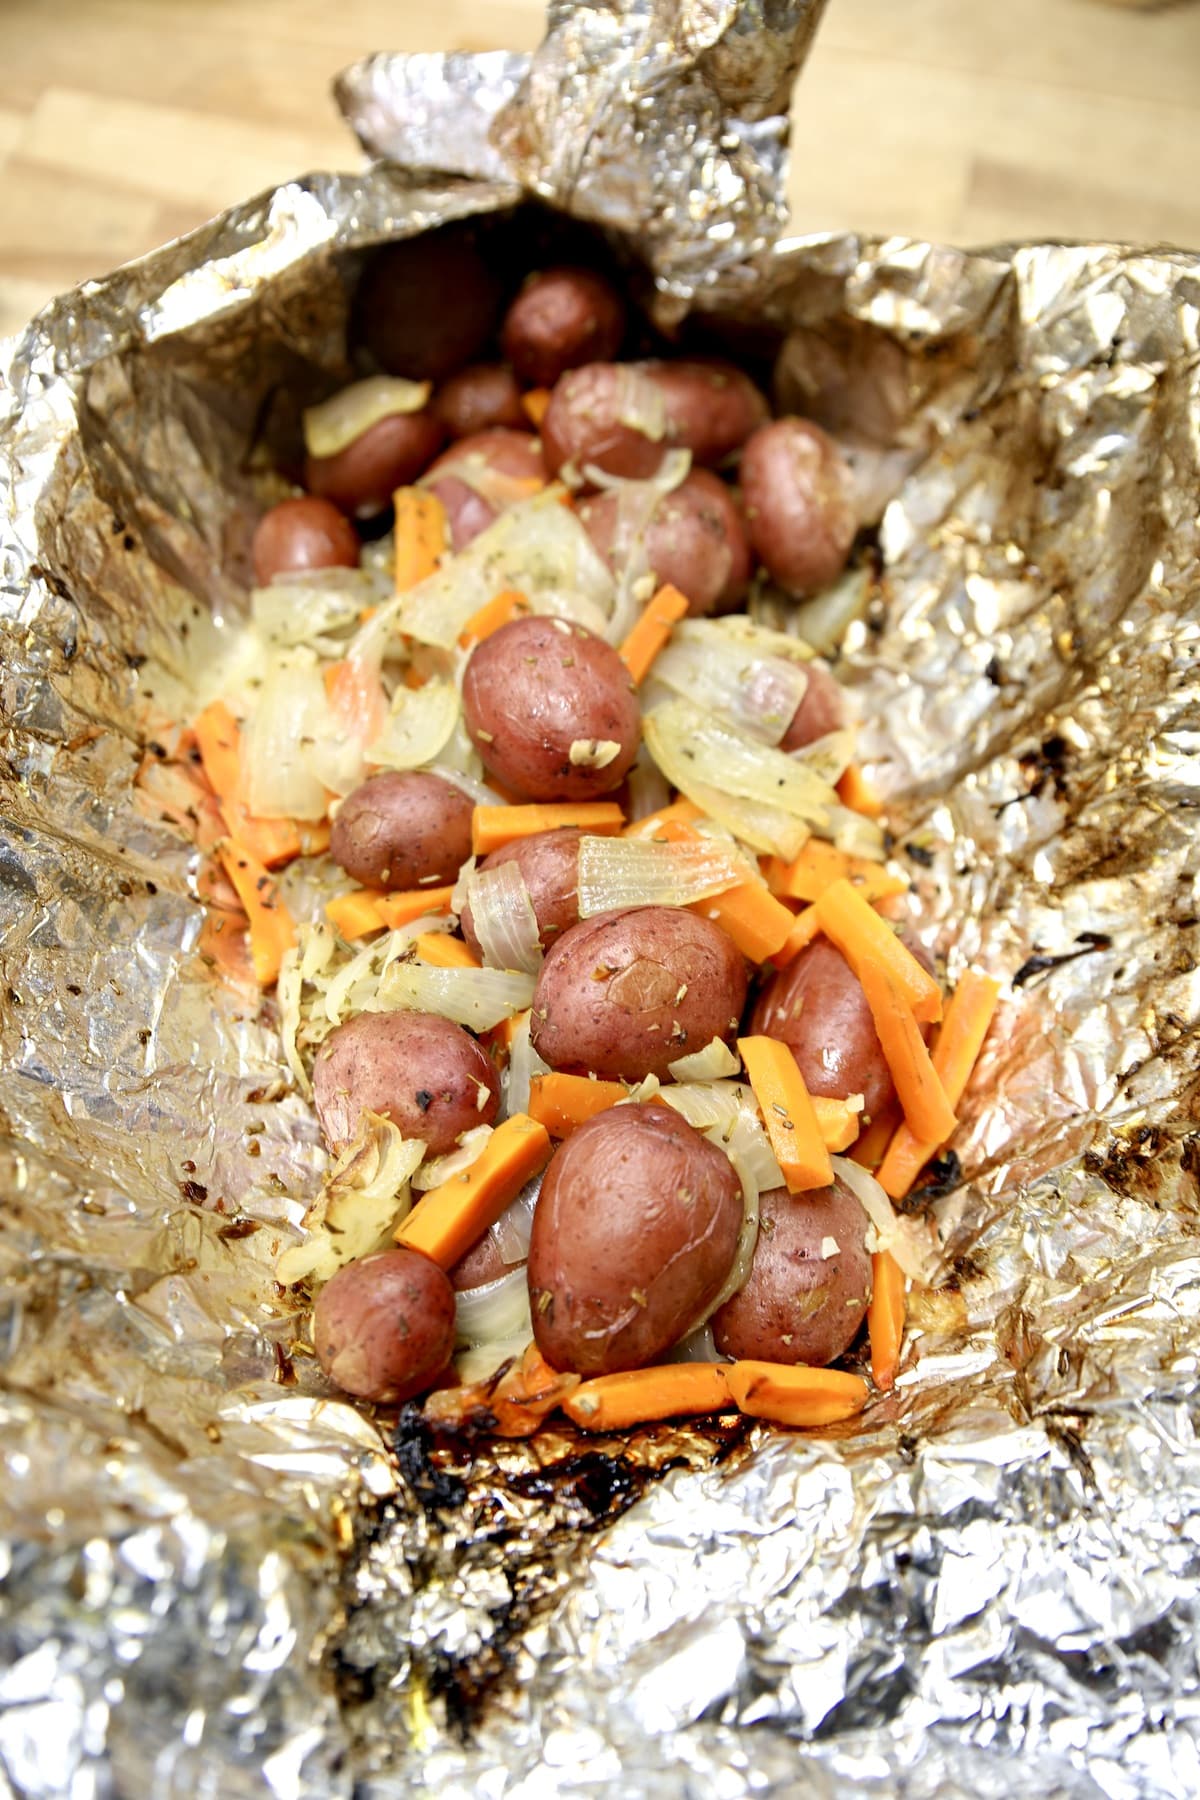 Foil packet of potatoes, carrots and onions.